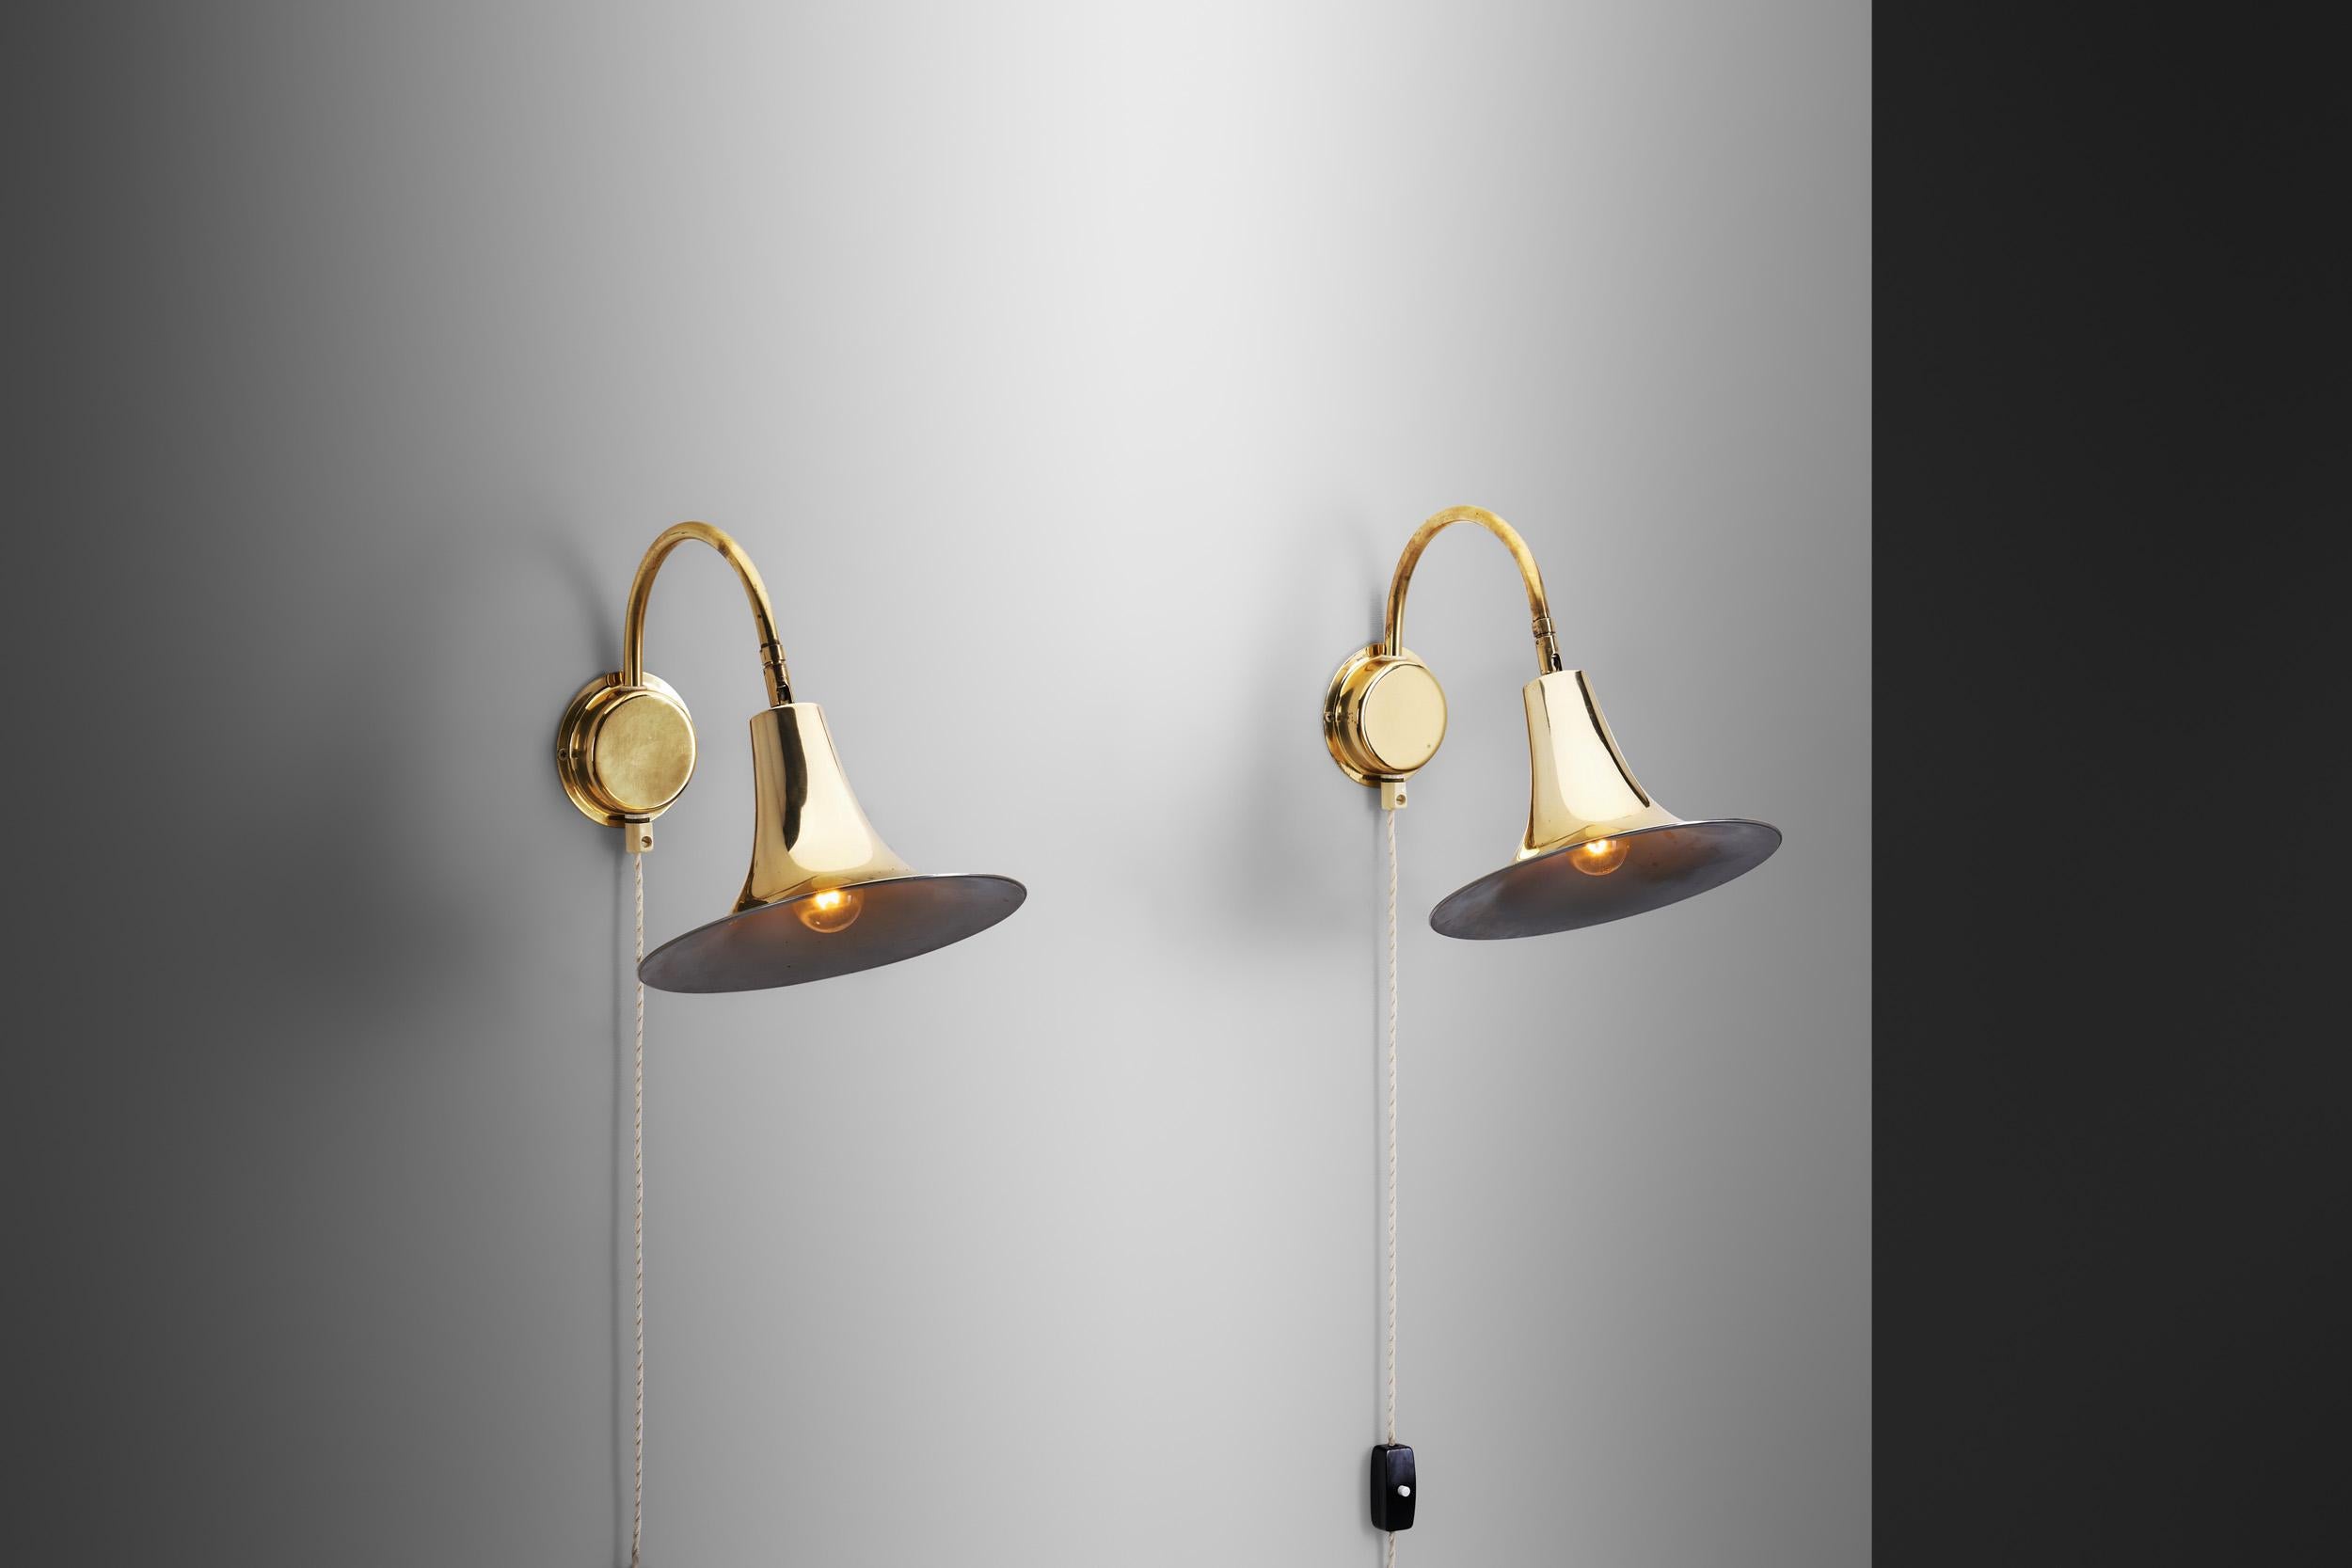 Swedish Modern, with its simplified lines and lack of excessive ornamentation, was a counter reaction to the earlier, more decorative design movements such as Art Deco. In comparison, as this pair of wall lamps demonstrates, the mid-century era